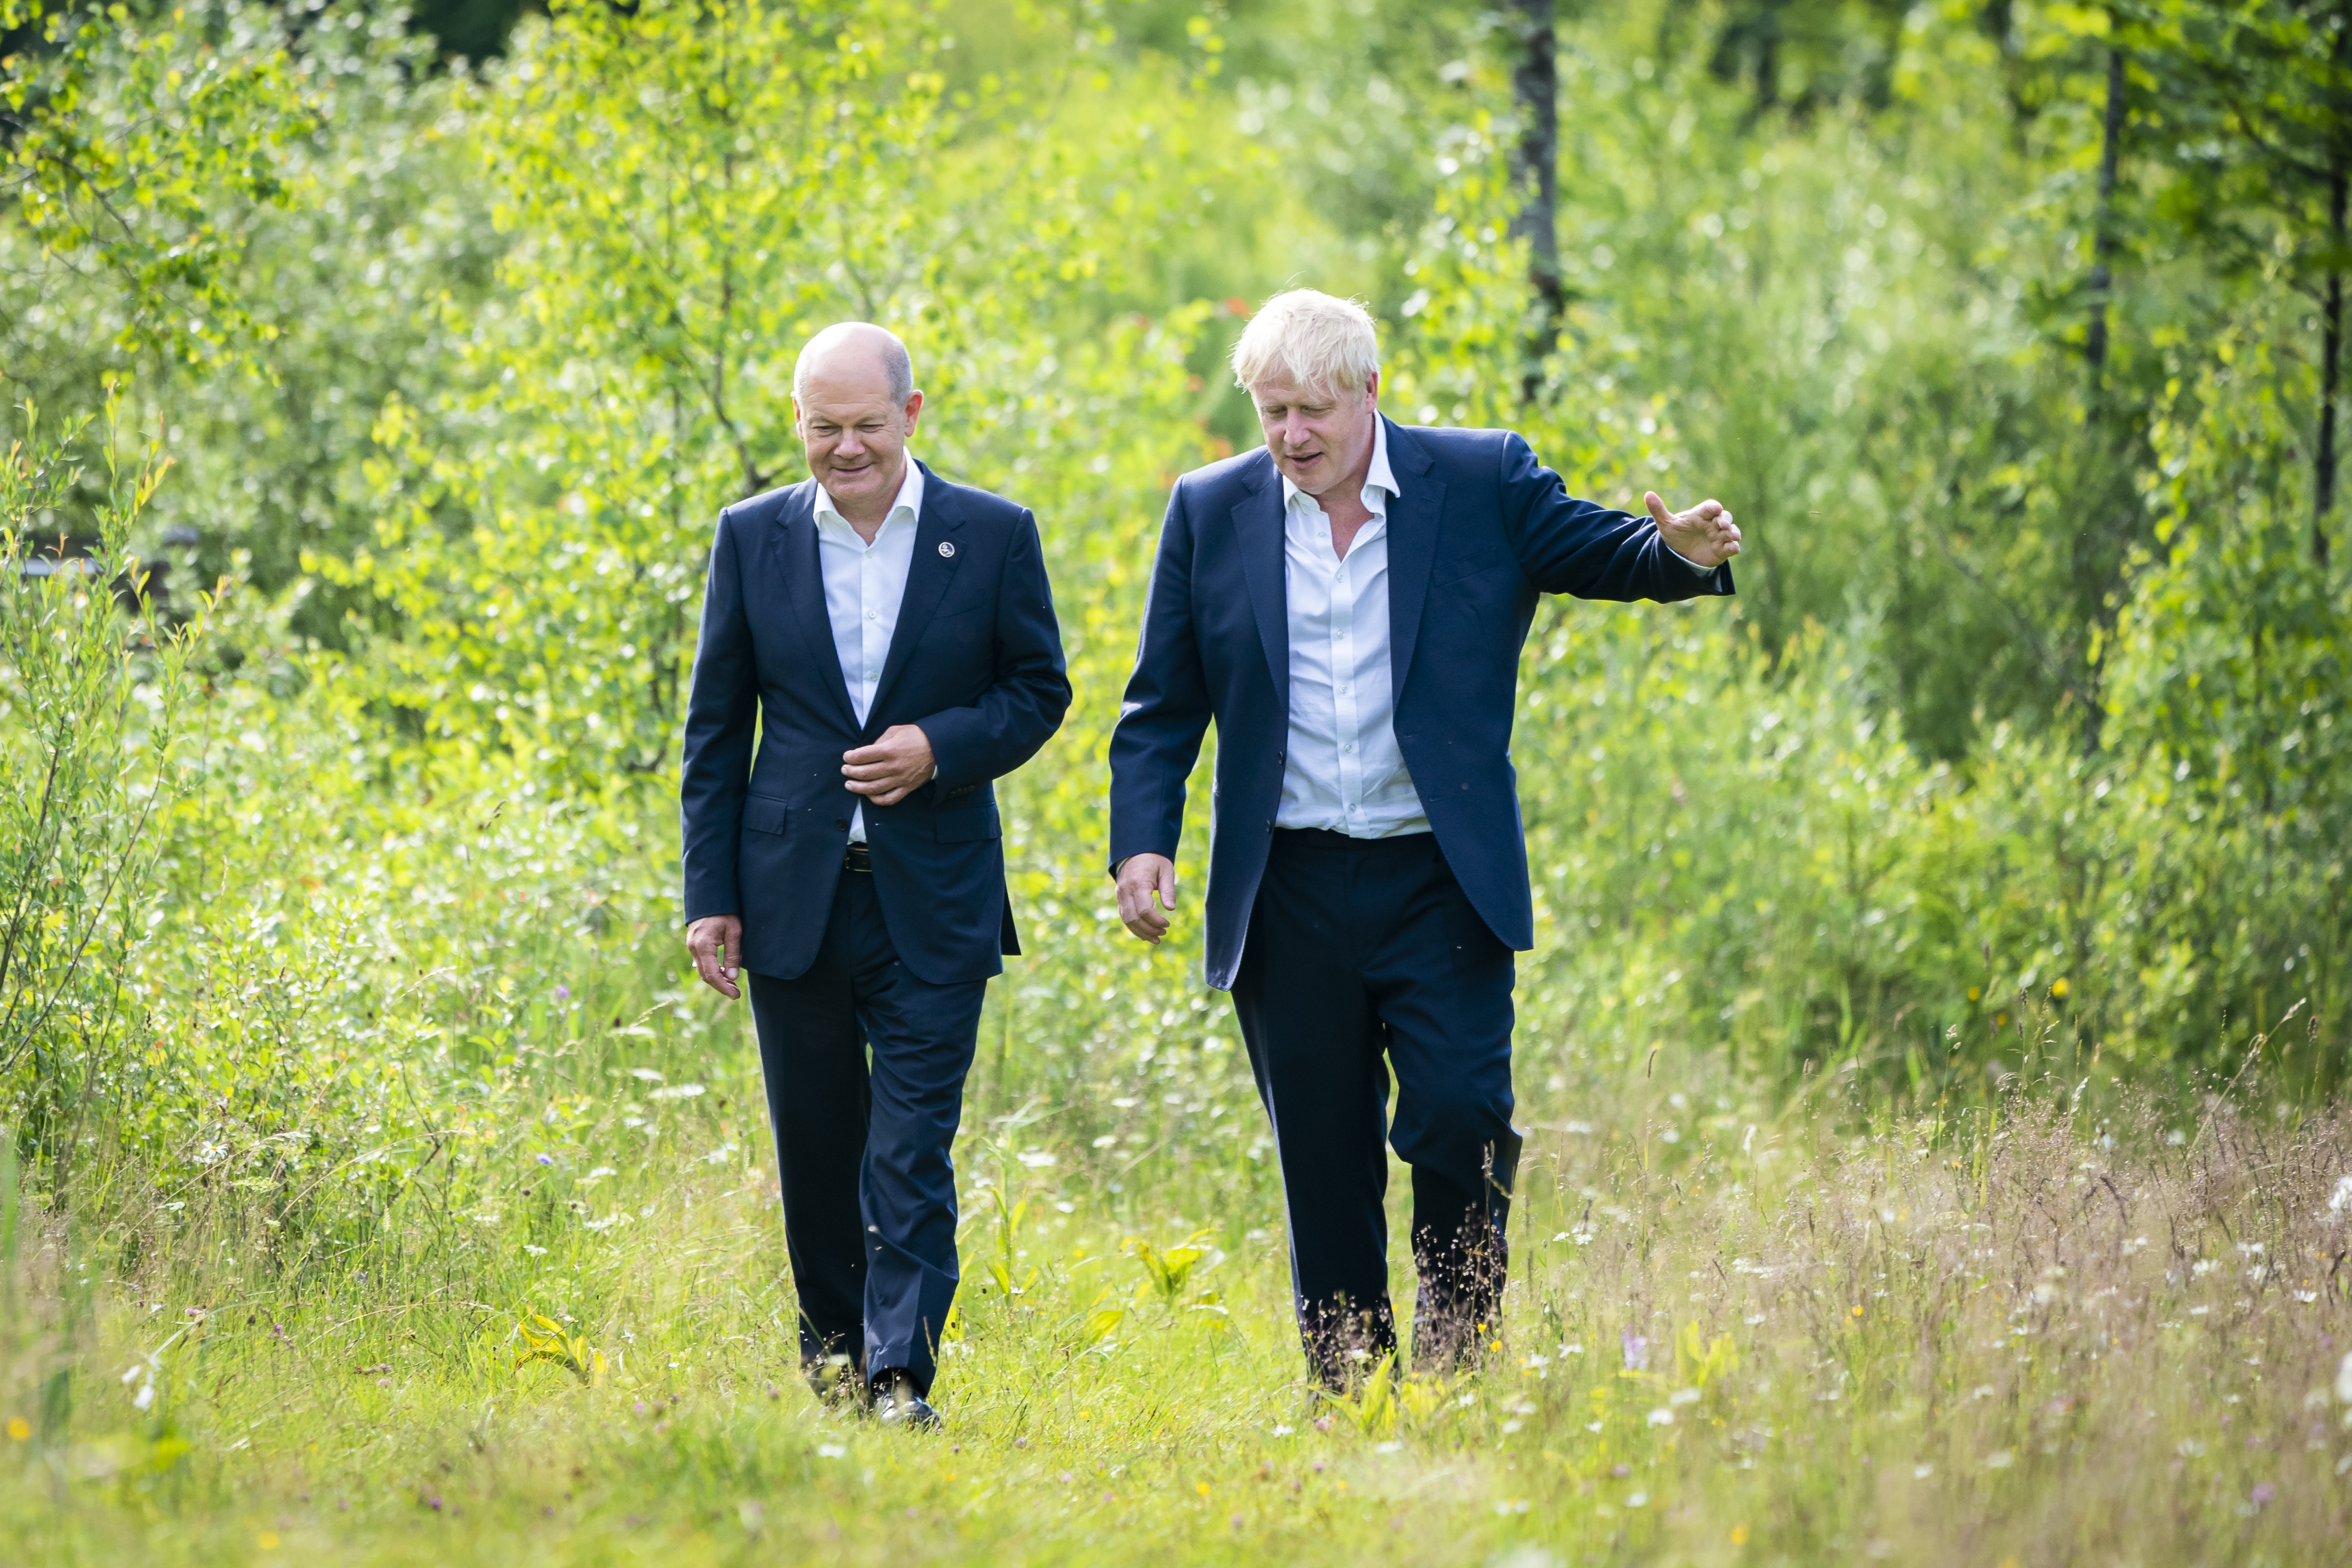 Federal Chancellor Olaf Scholz and British Prime Minister Boris Johnson engage in bilateral talks during a walk.